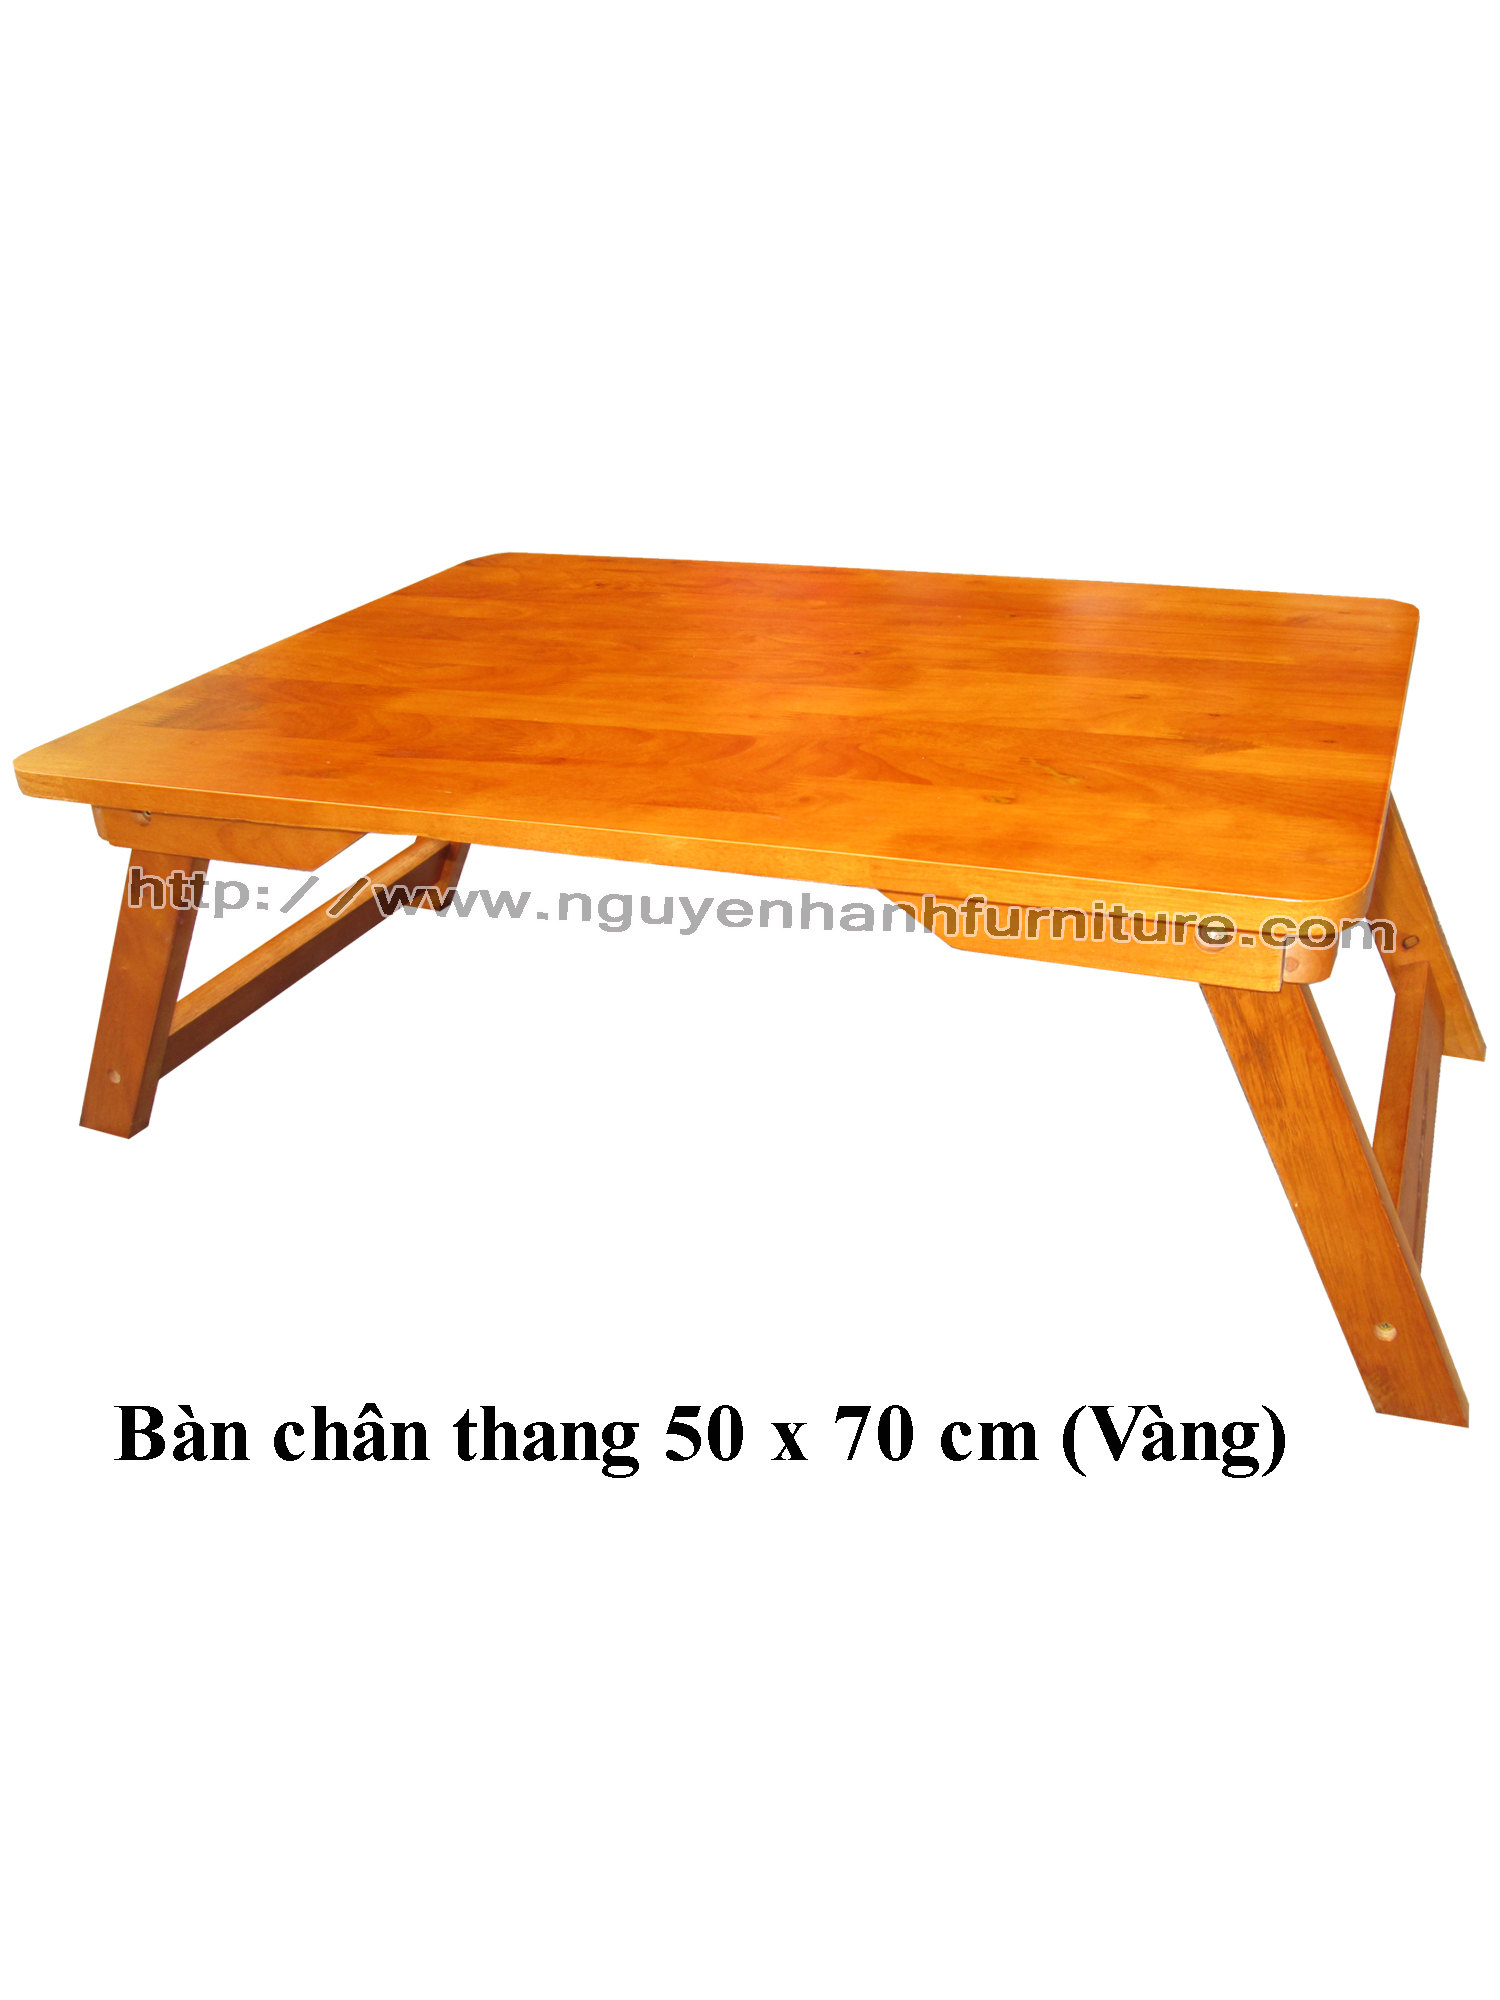 Name product: 5 x 7 Tea table with ladder shape legs (Yellow)  - Dimensions: 50 x 70 x 24 (H) - Description: Wood natural rubber